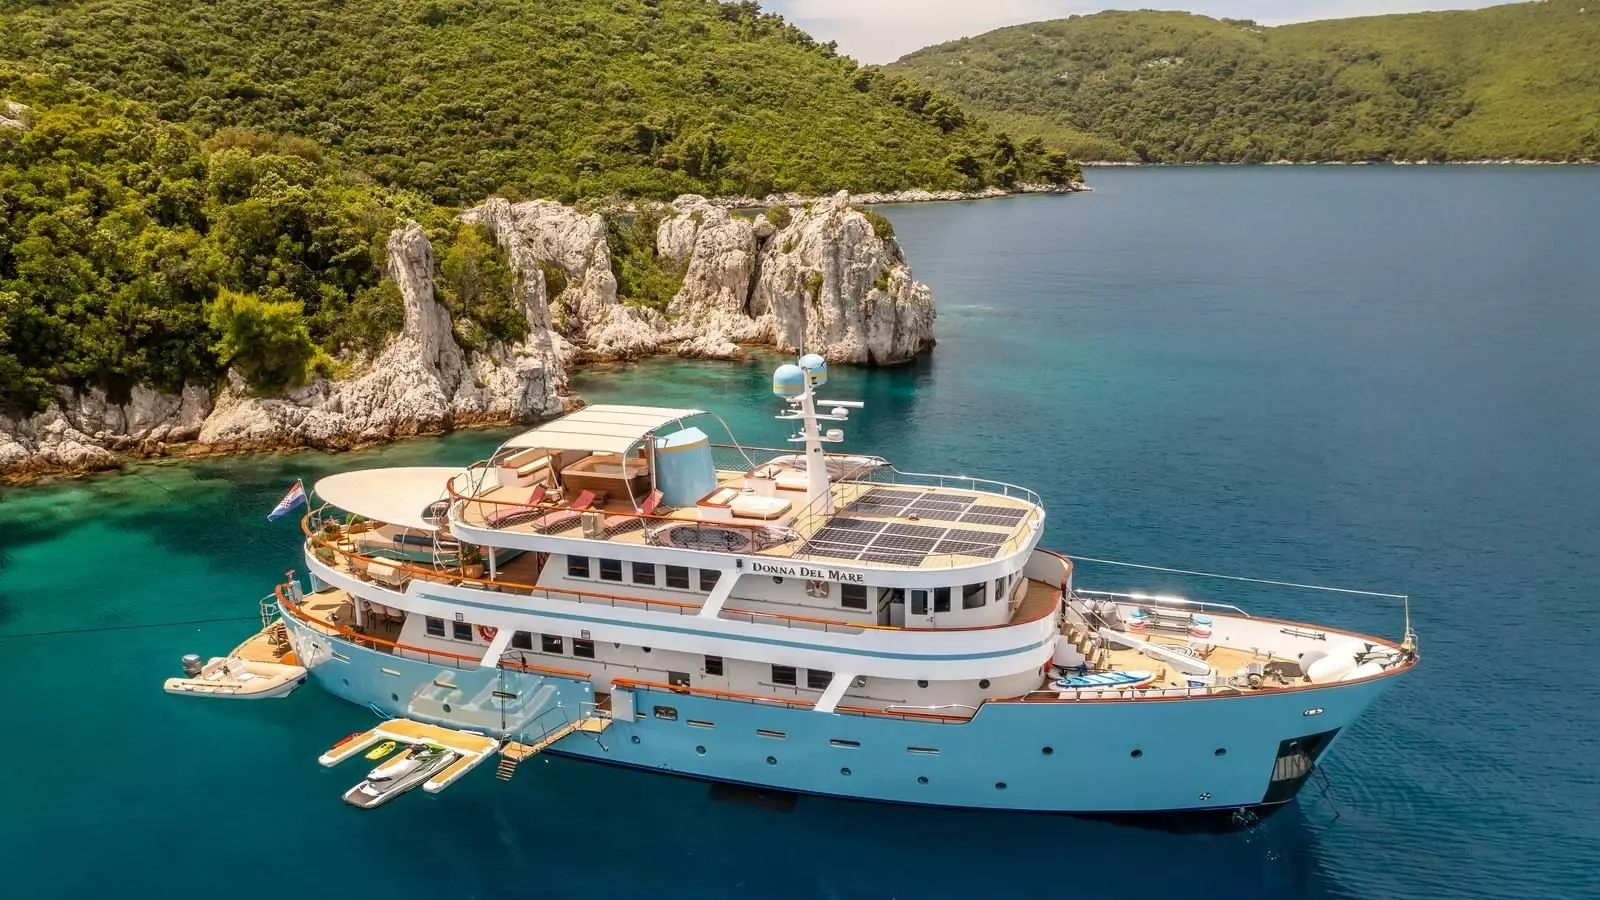 Donna Del Mare by Aegean Yacht - Top rates for a Charter of a private Superyacht in Montenegro